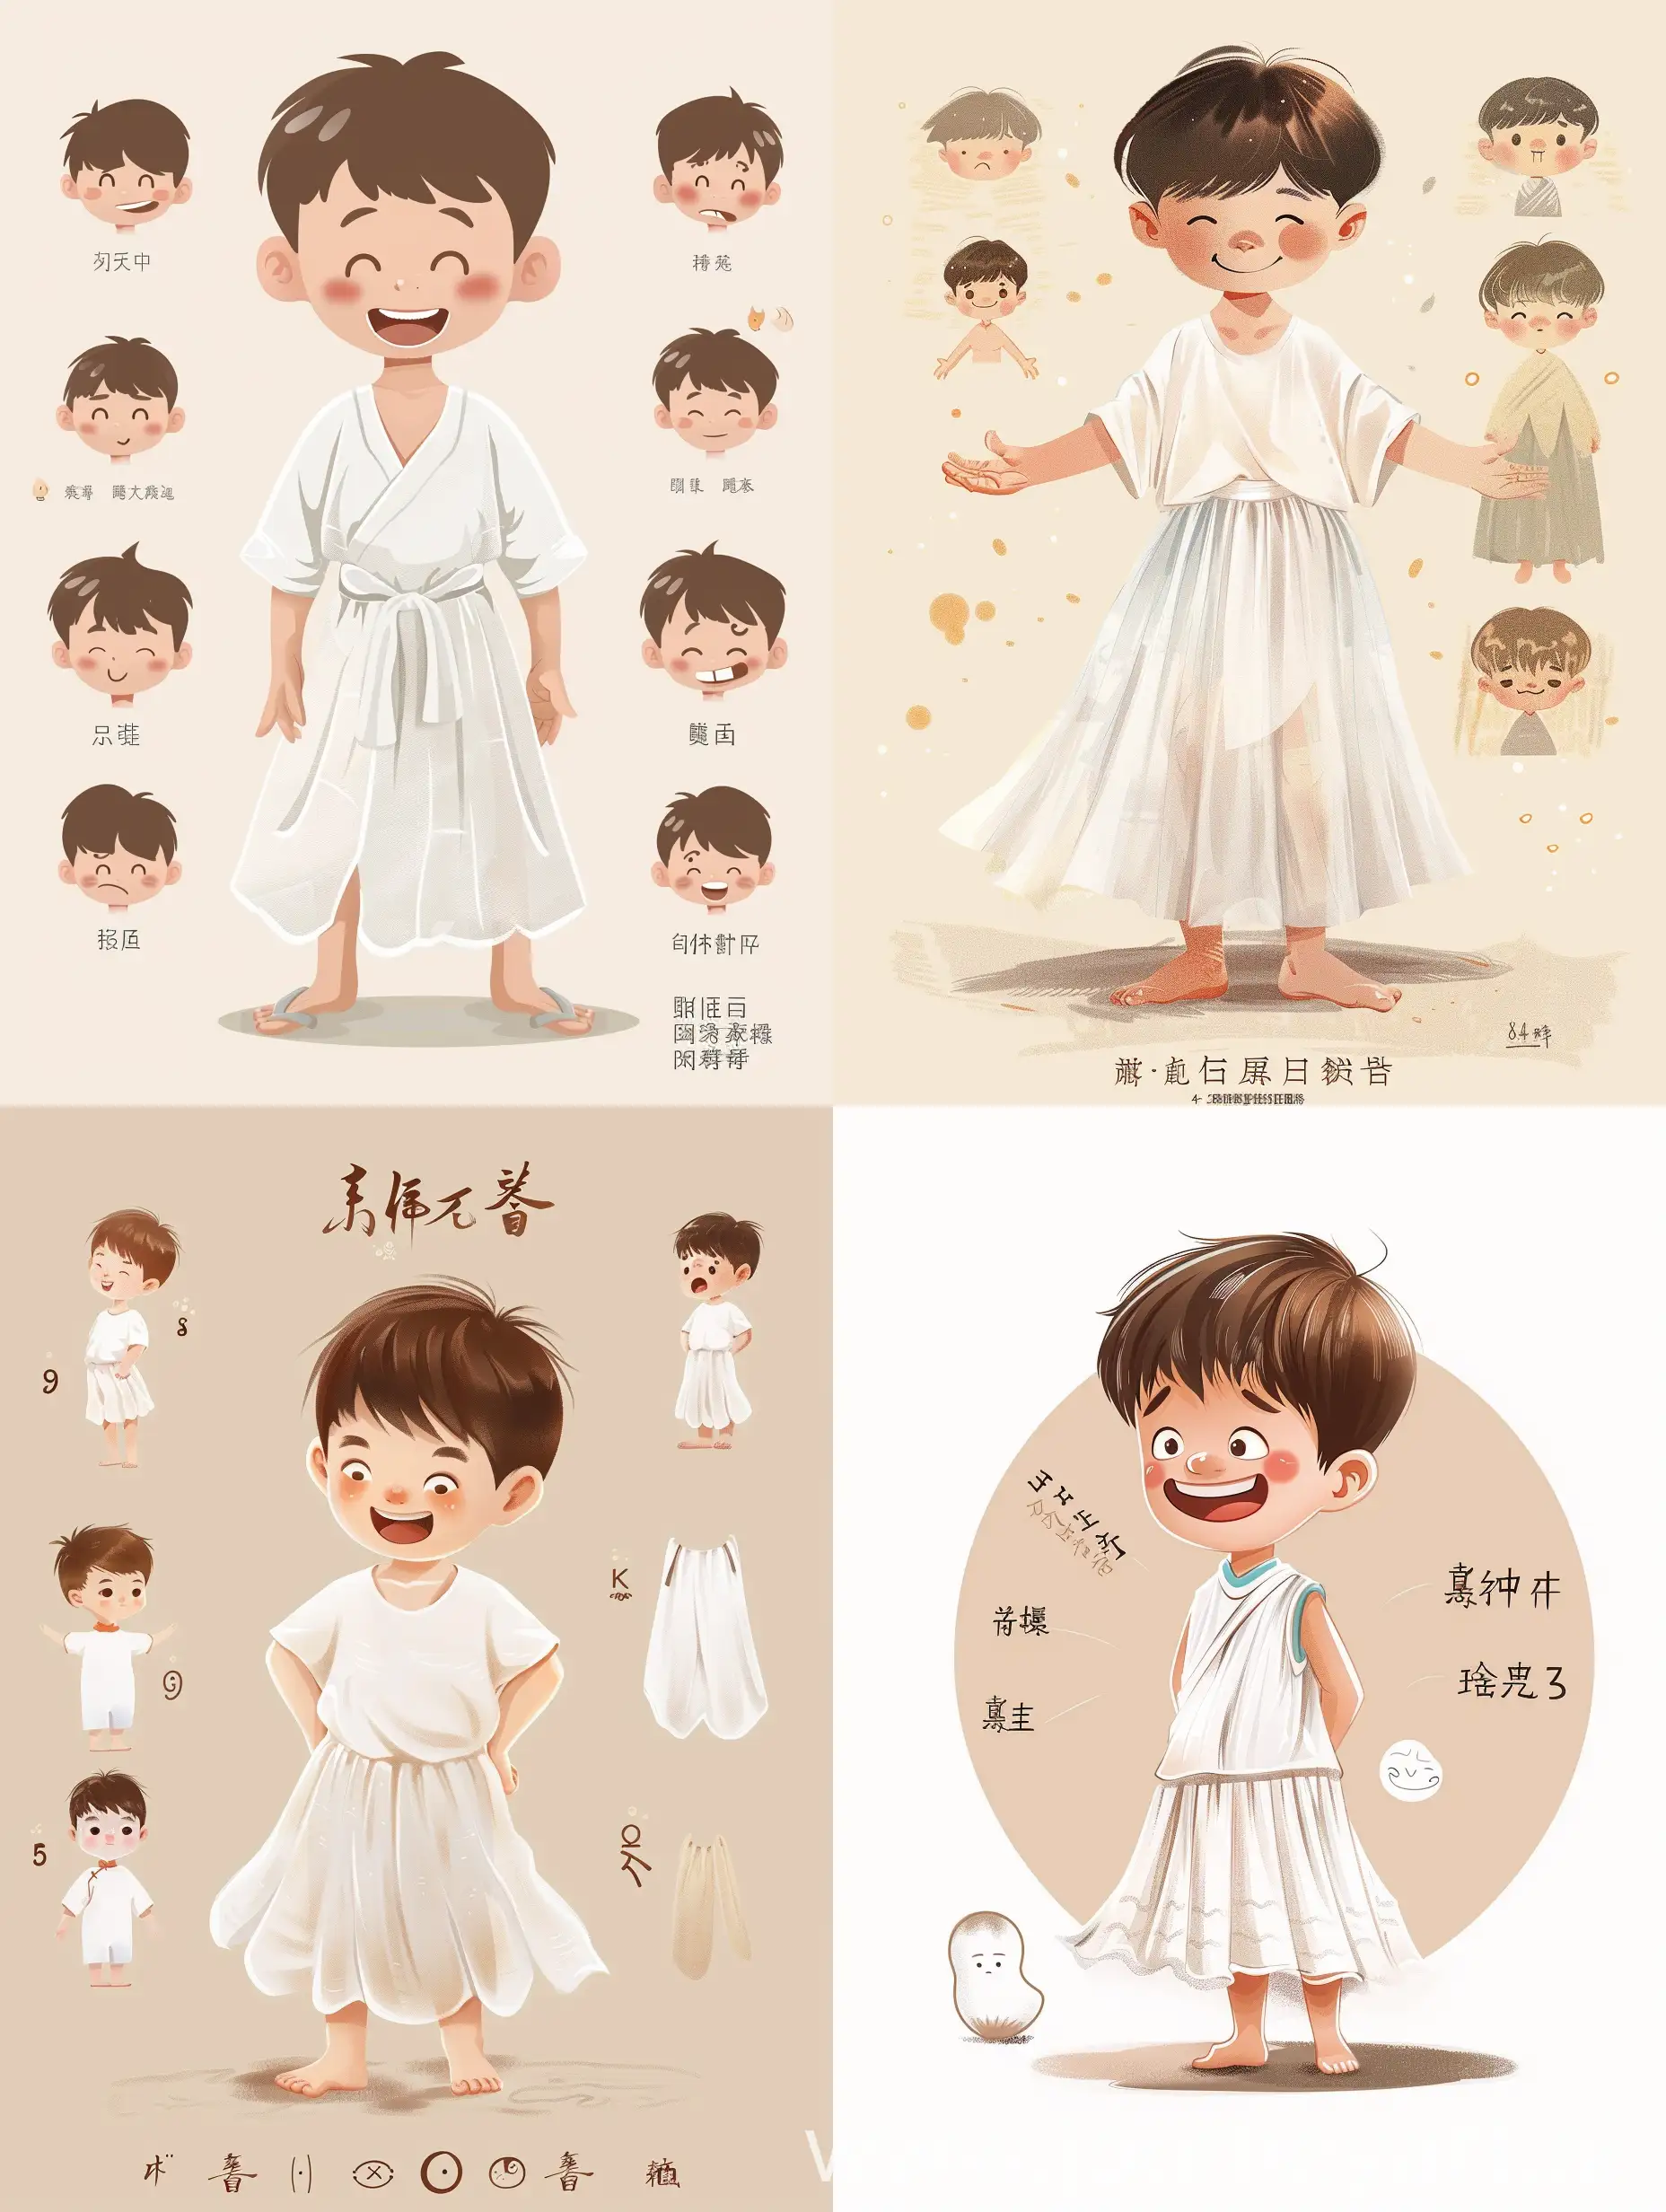 Smiling-Tang-Dynasty-Boy-in-White-Gauze-Skirt-Chinese-Painting-Costume-with-Modest-Charm